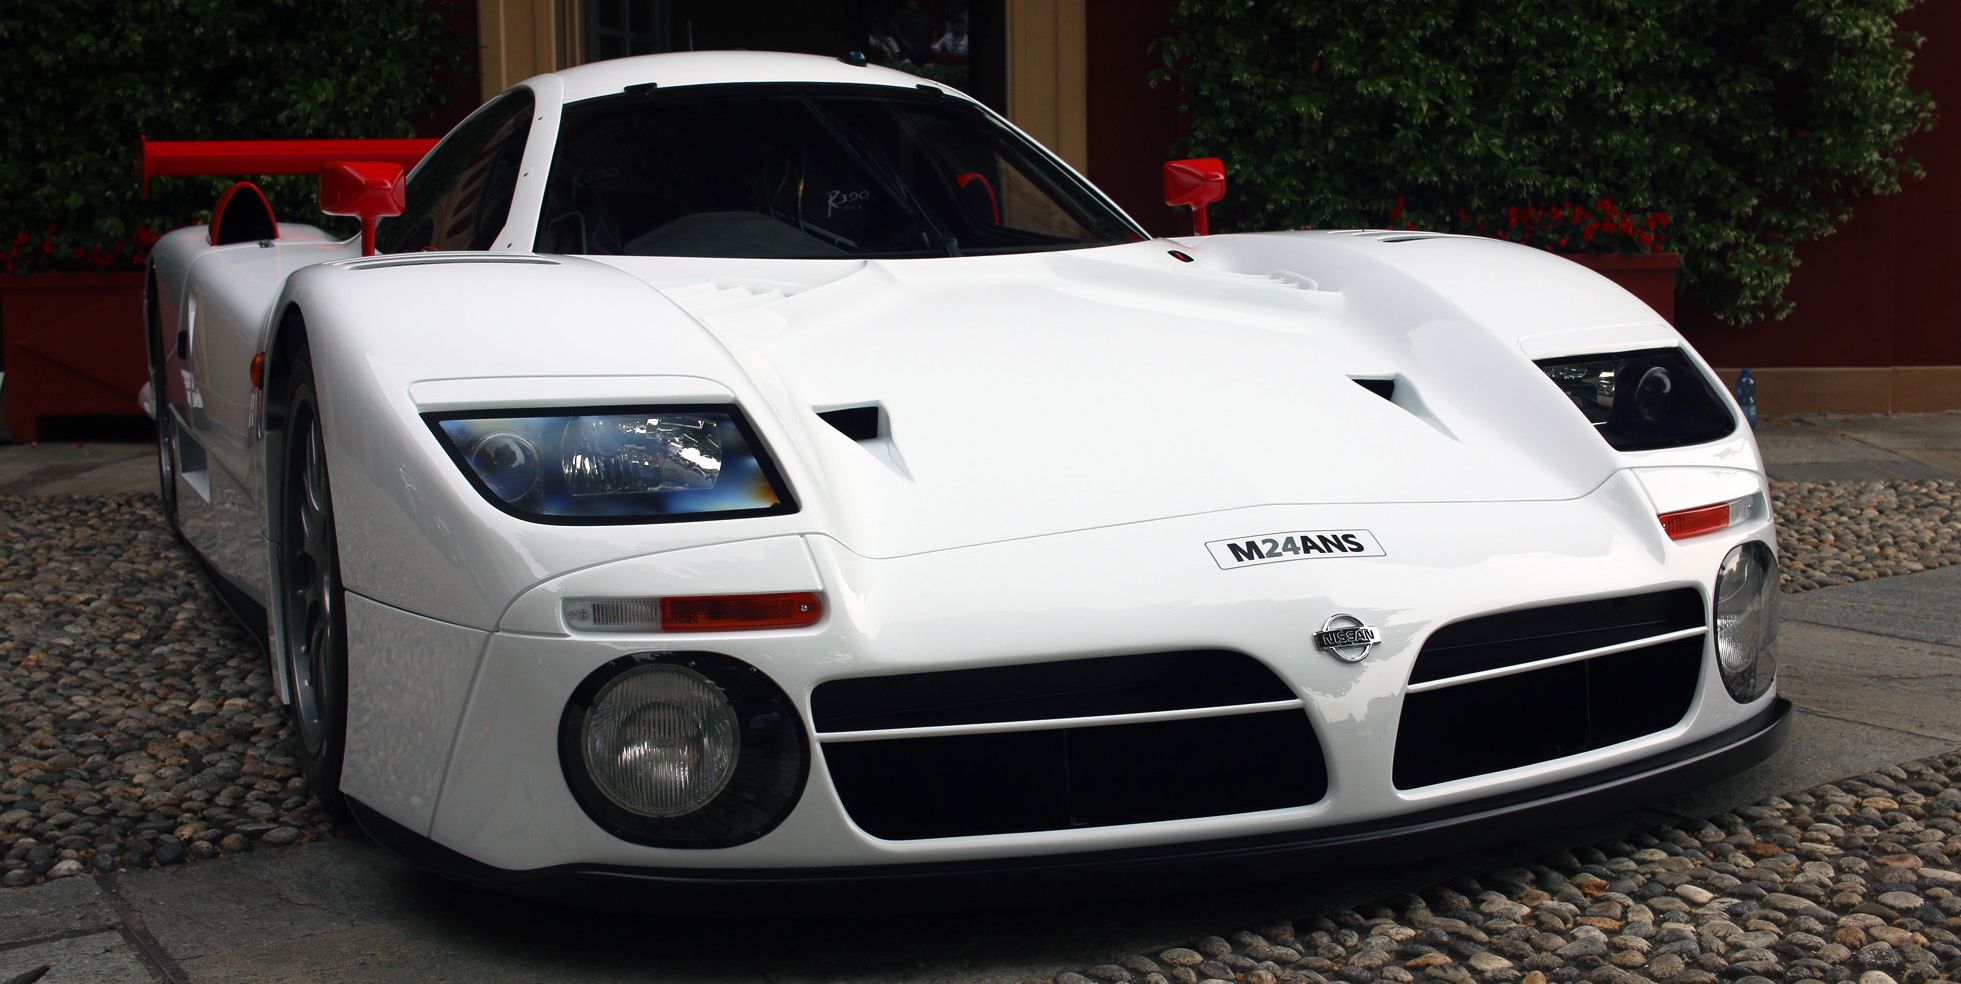 Five Unforgettable Cars From the Most Prestigious Concorso in Italy